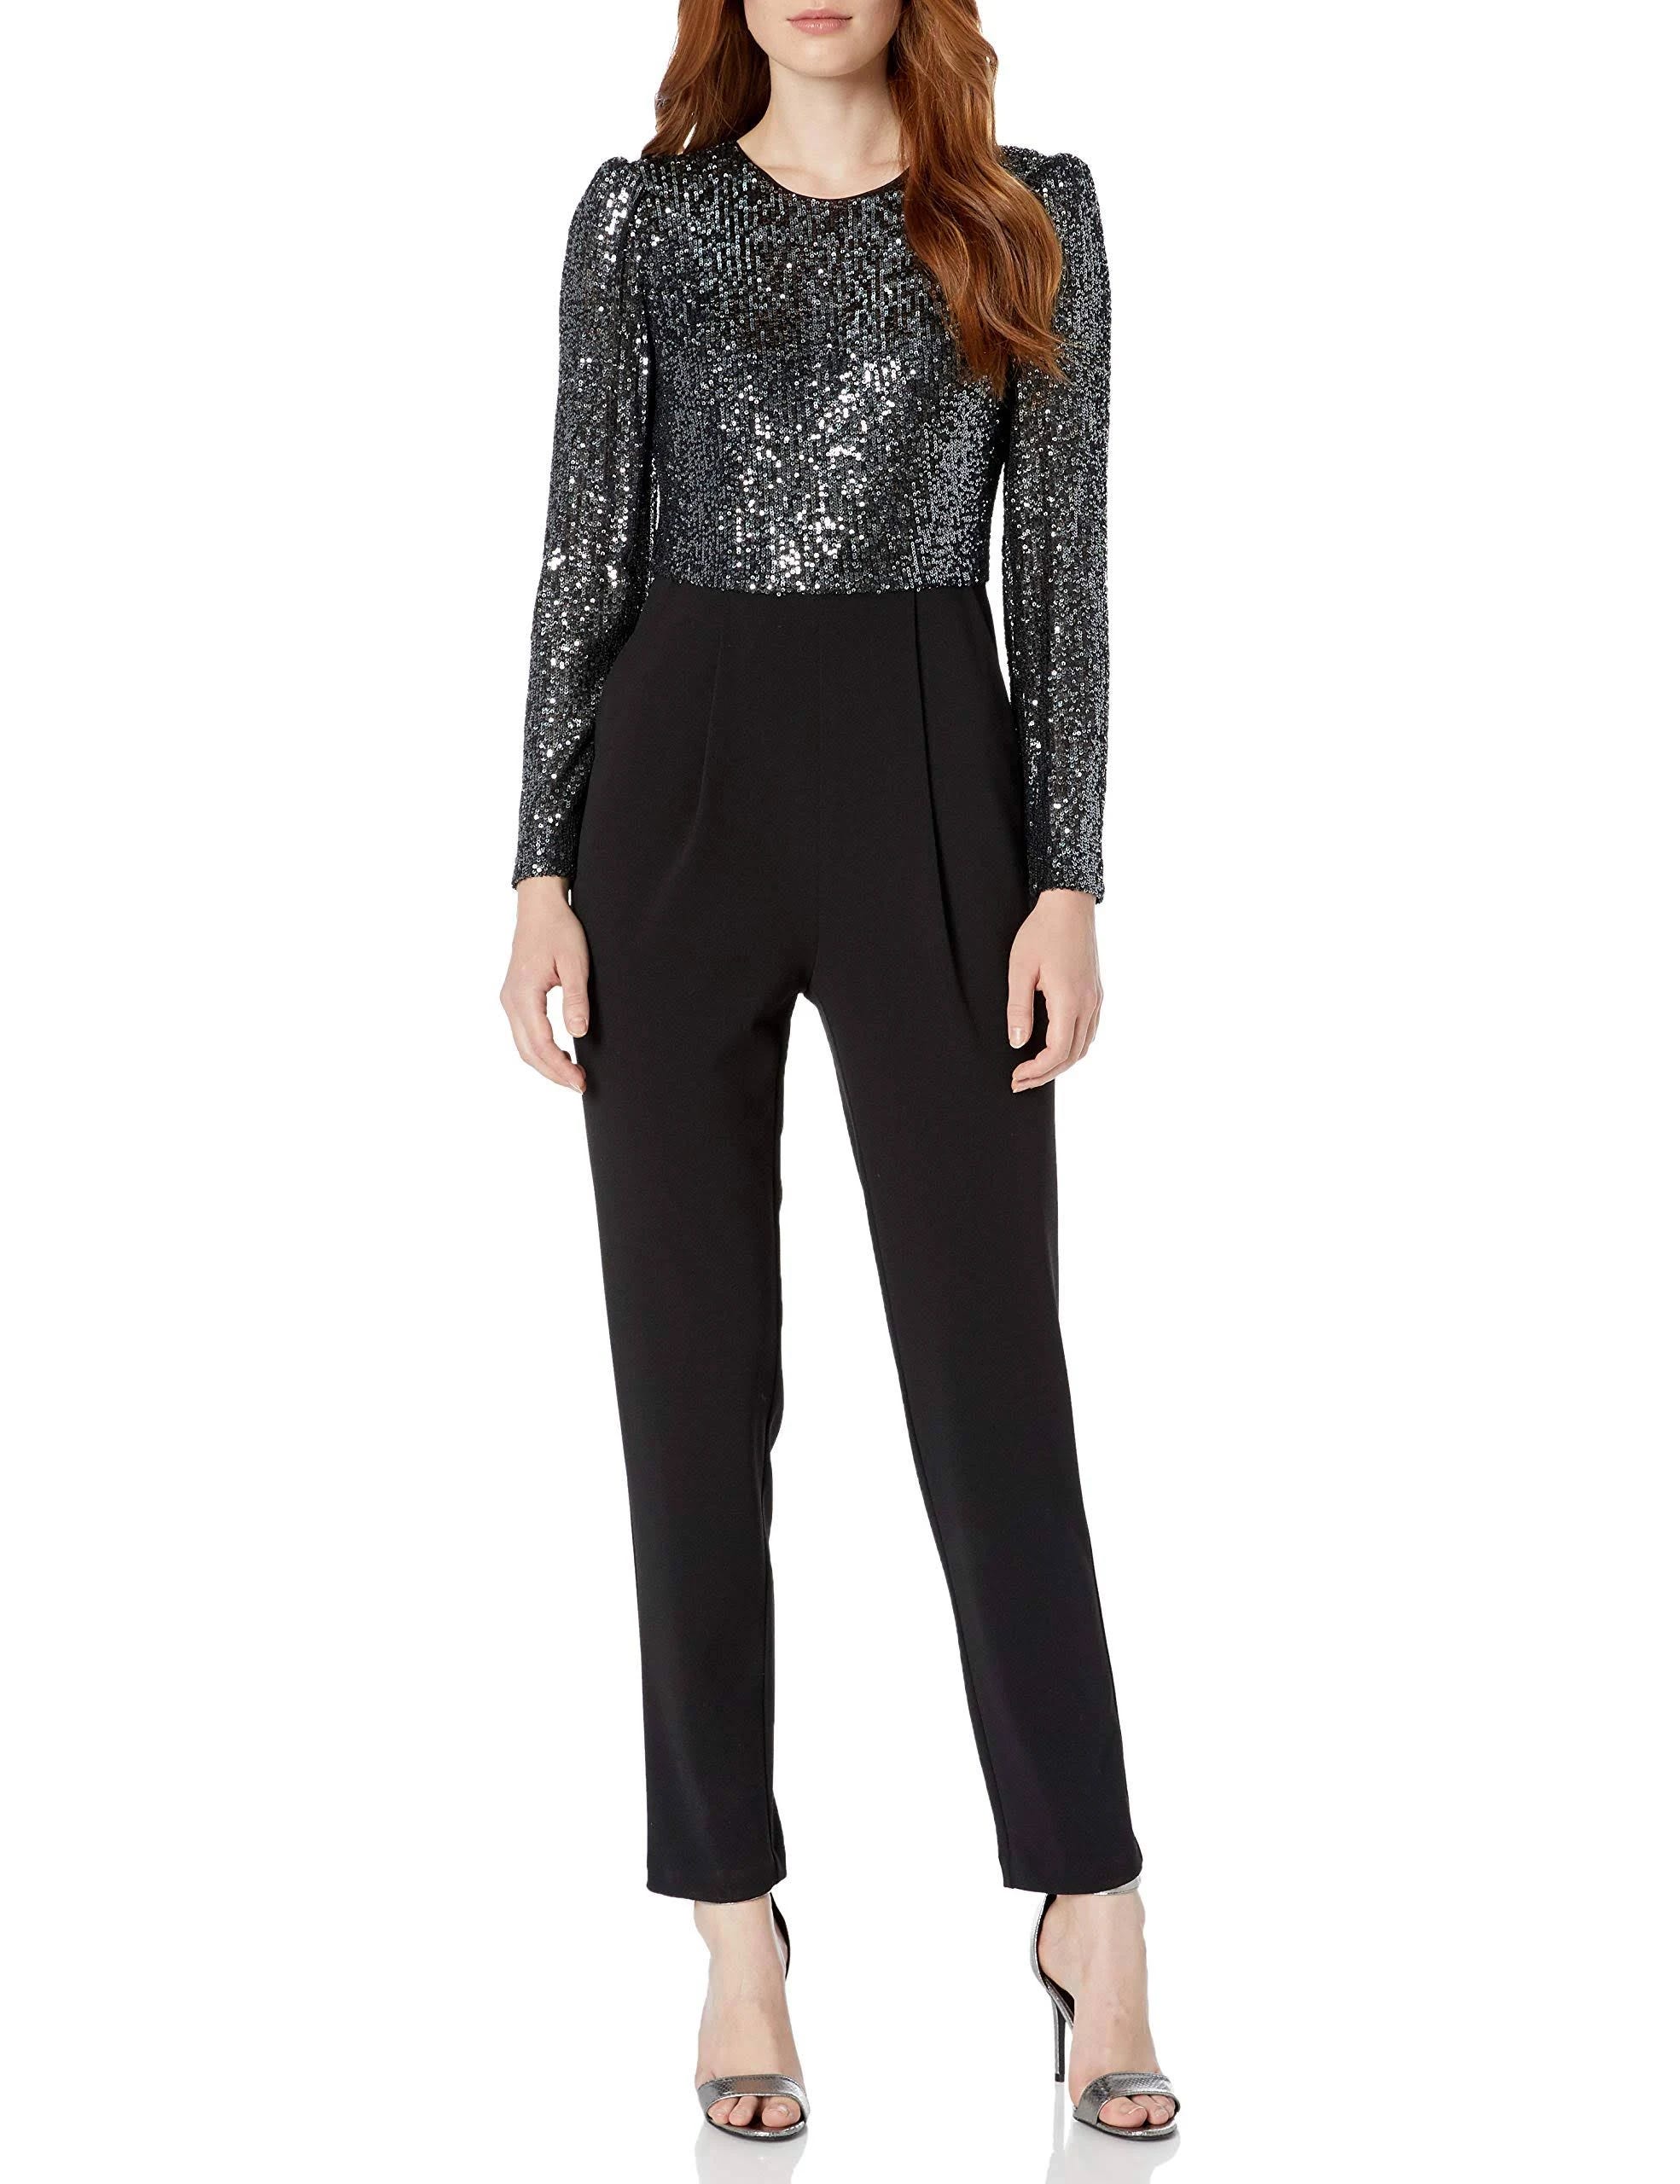 Stylish Black Sequin Jumpsuit for Party | Image